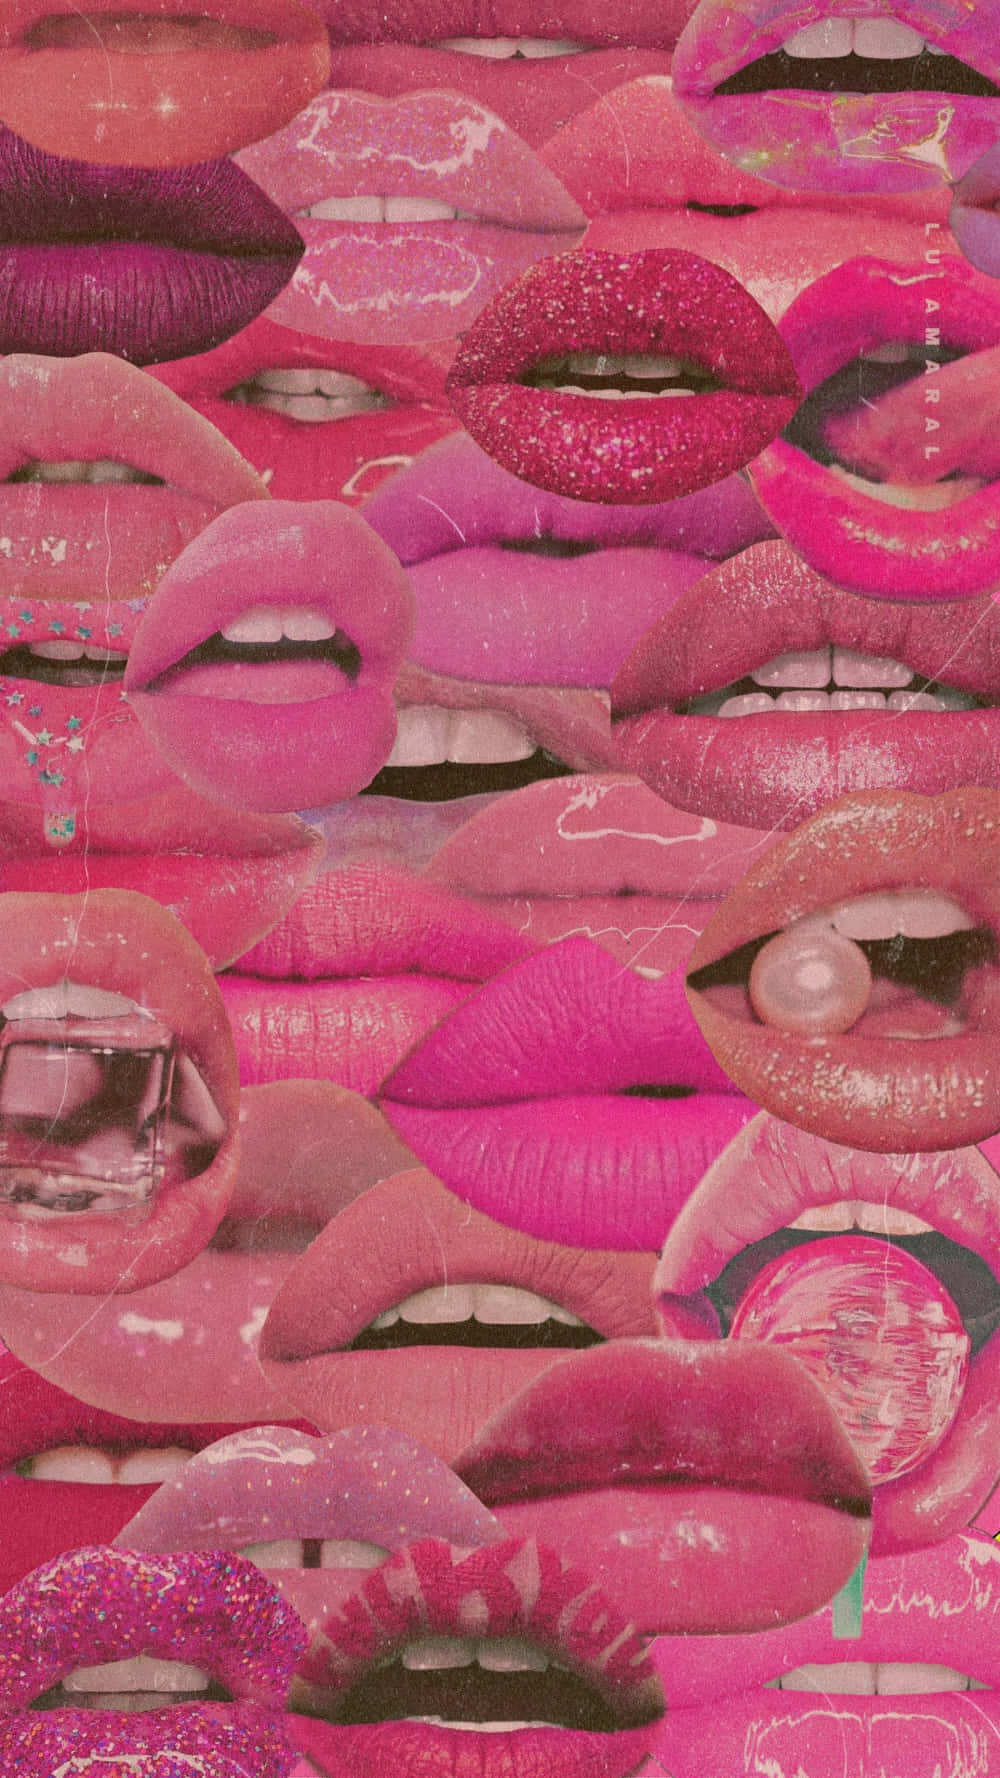 A collage of pink lips with different textures and shapes. - Lips